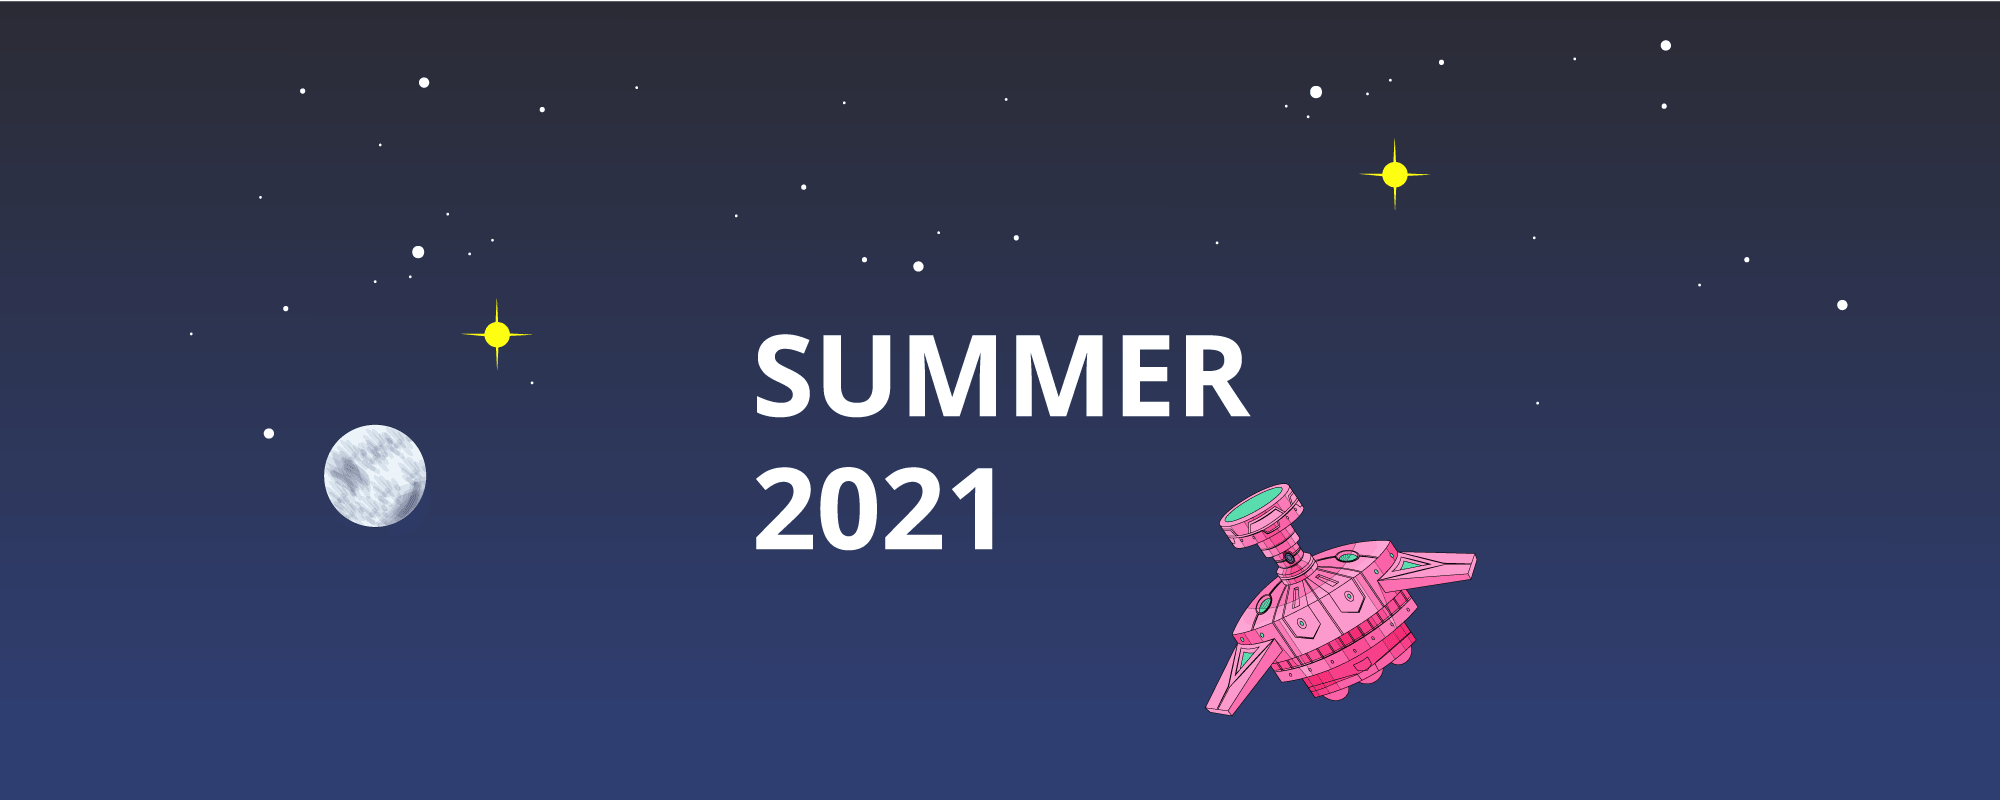 Post Summer Product Updates: 2021 Edition